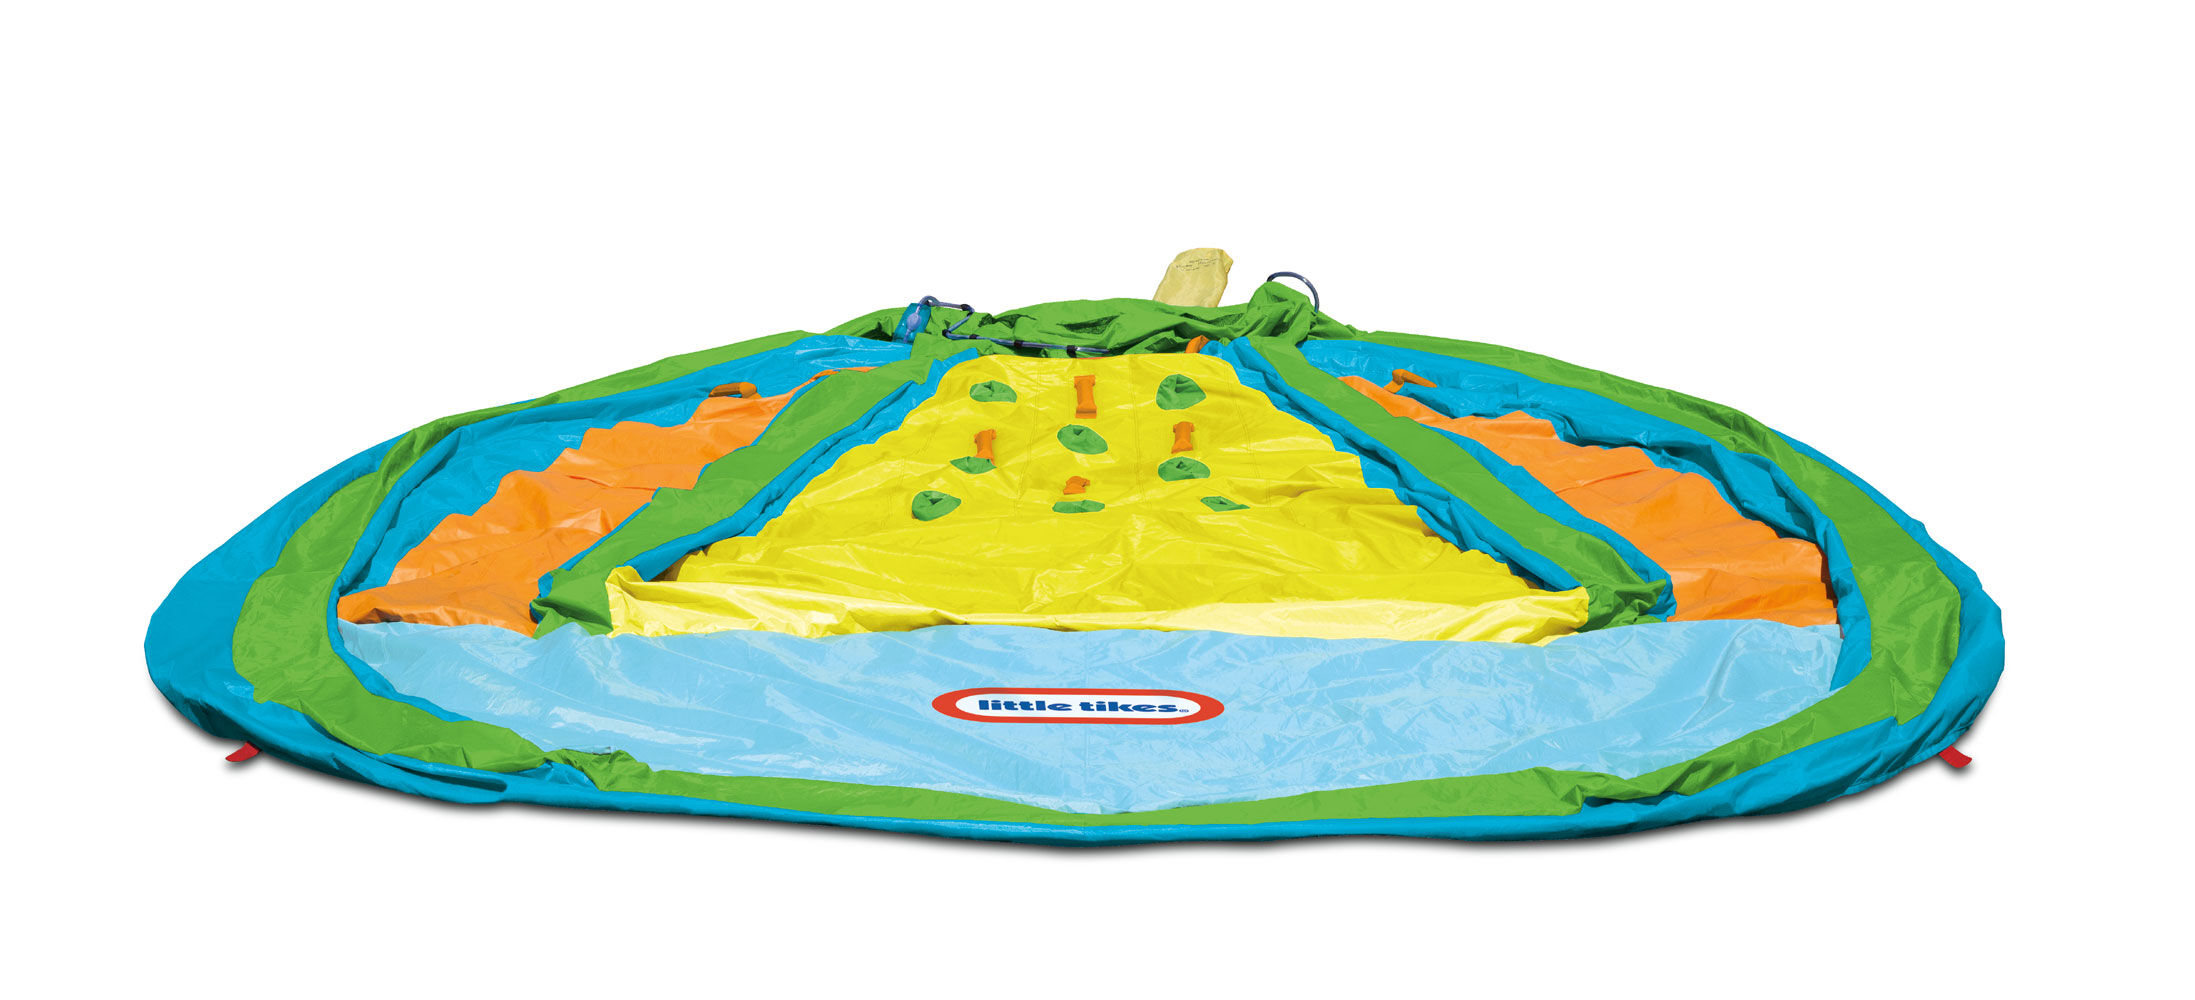 little tikes rocky mountain river race inflatable